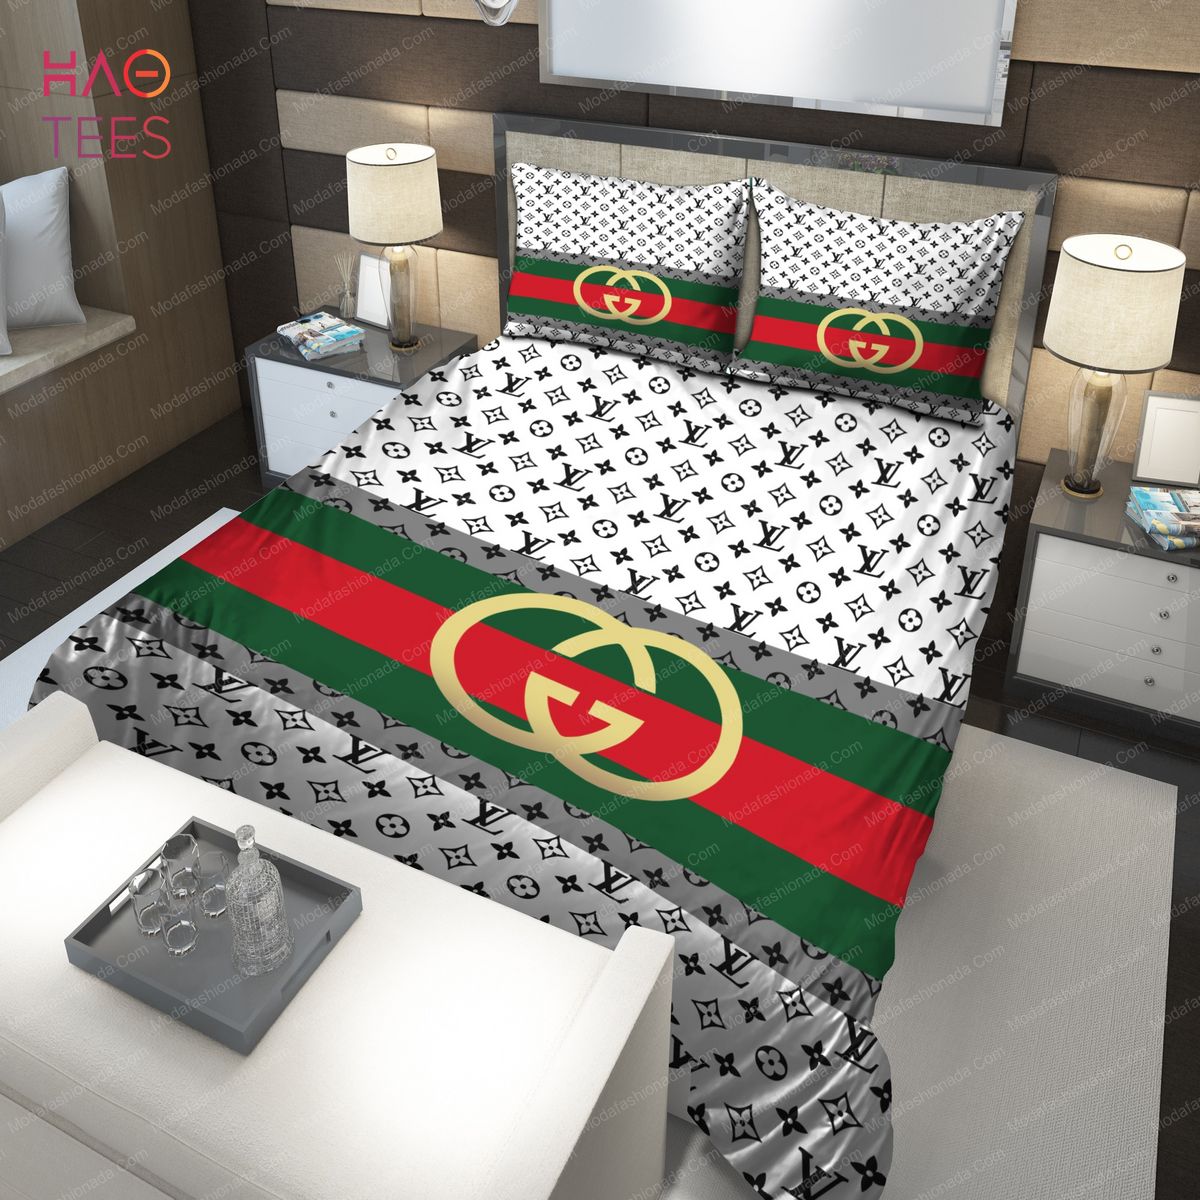 Louis Vuitton Big Logo With Colorful Icon With Grey Monogram Pattern In  White Background Bedding Set - Mugteeco